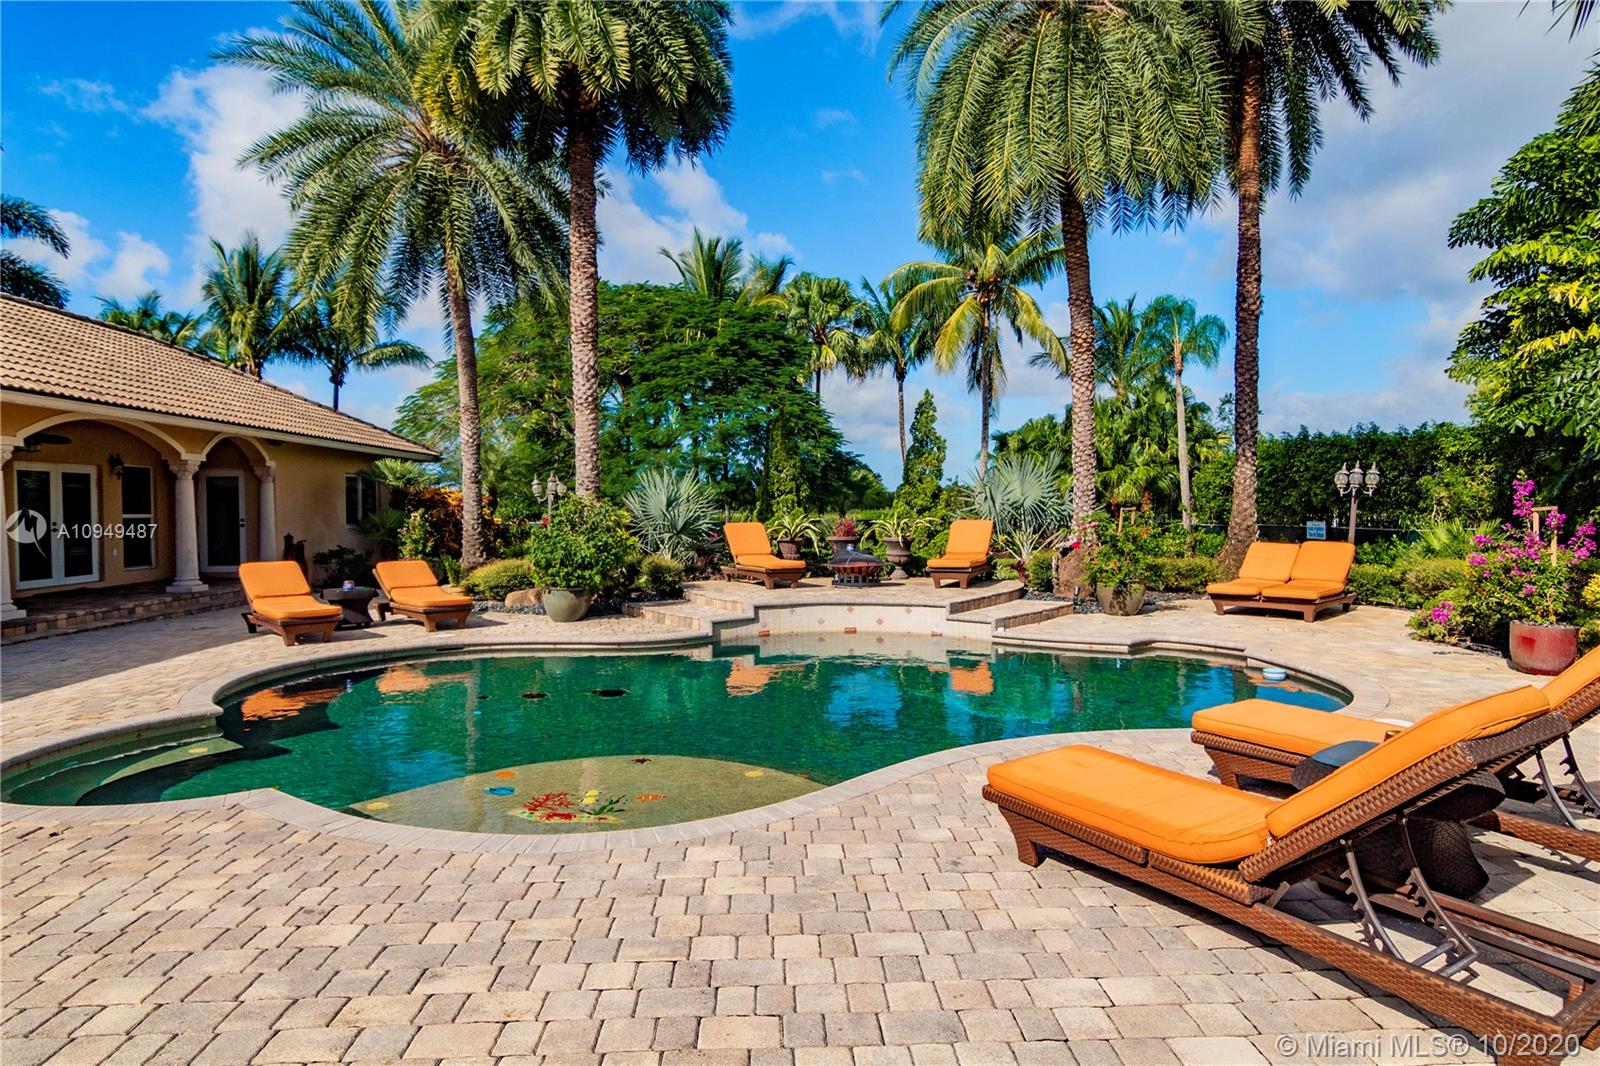 a view of a swimming pool with lounge chairs in a patio